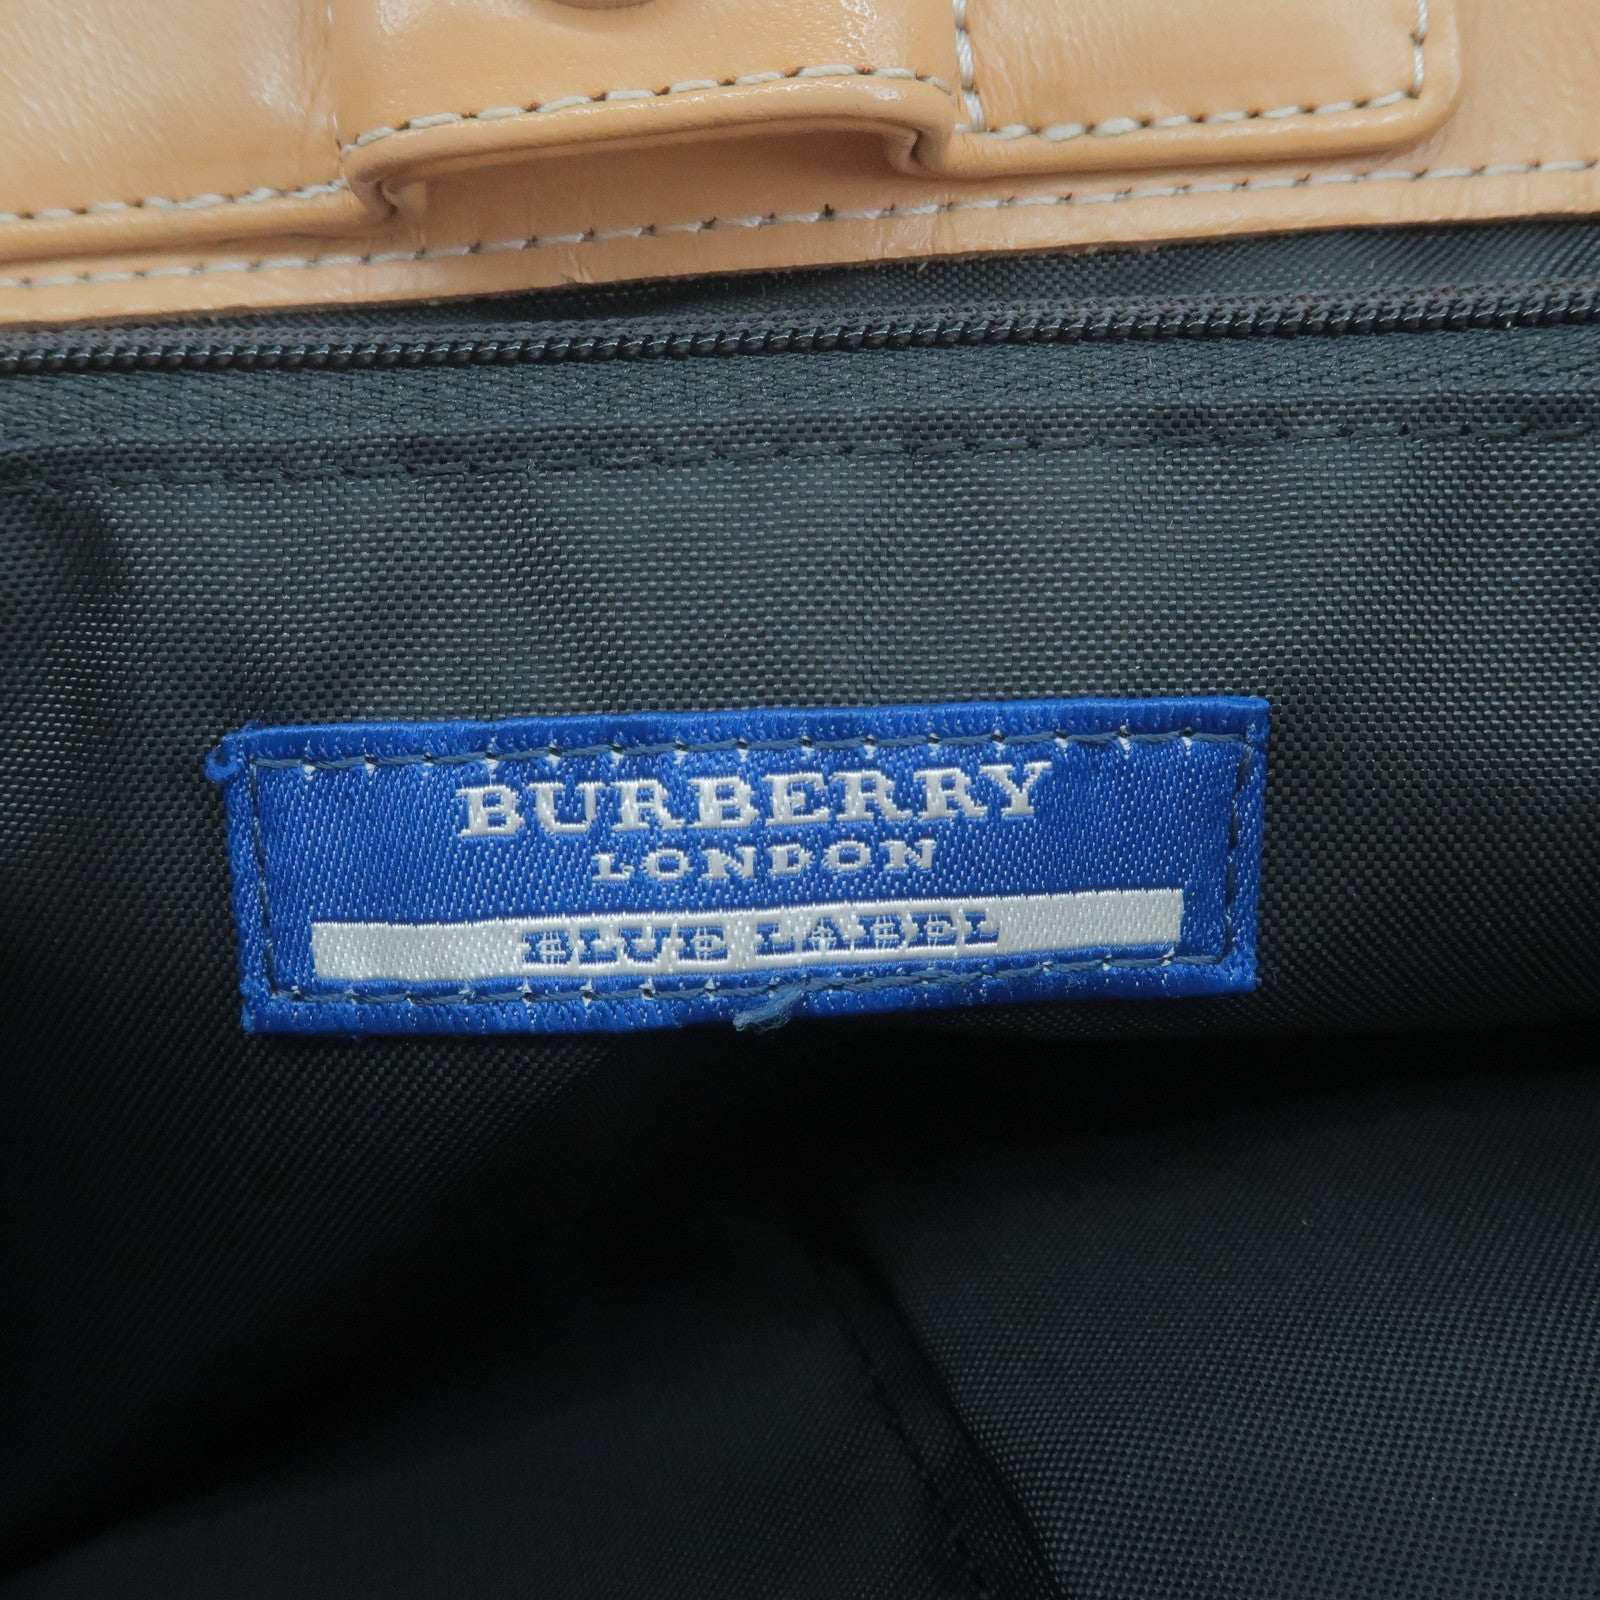 Preowned Authentic Burberry Blue Label Wallet